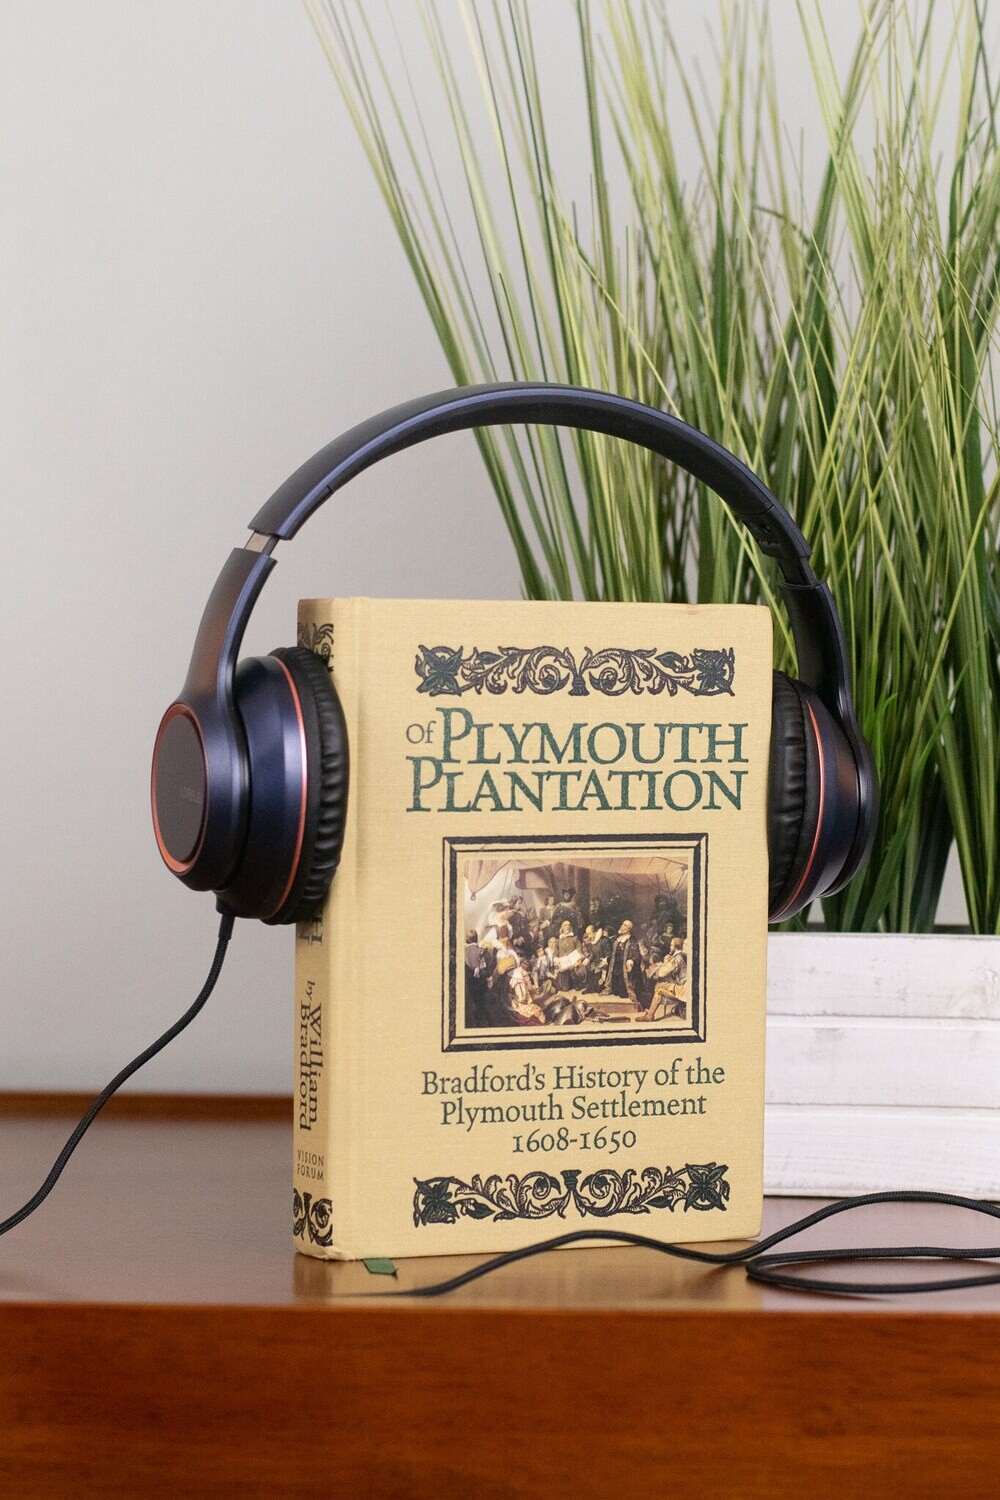 Of Plymouth Plantation, Audio Summary Part 2, 1620 Holland to America